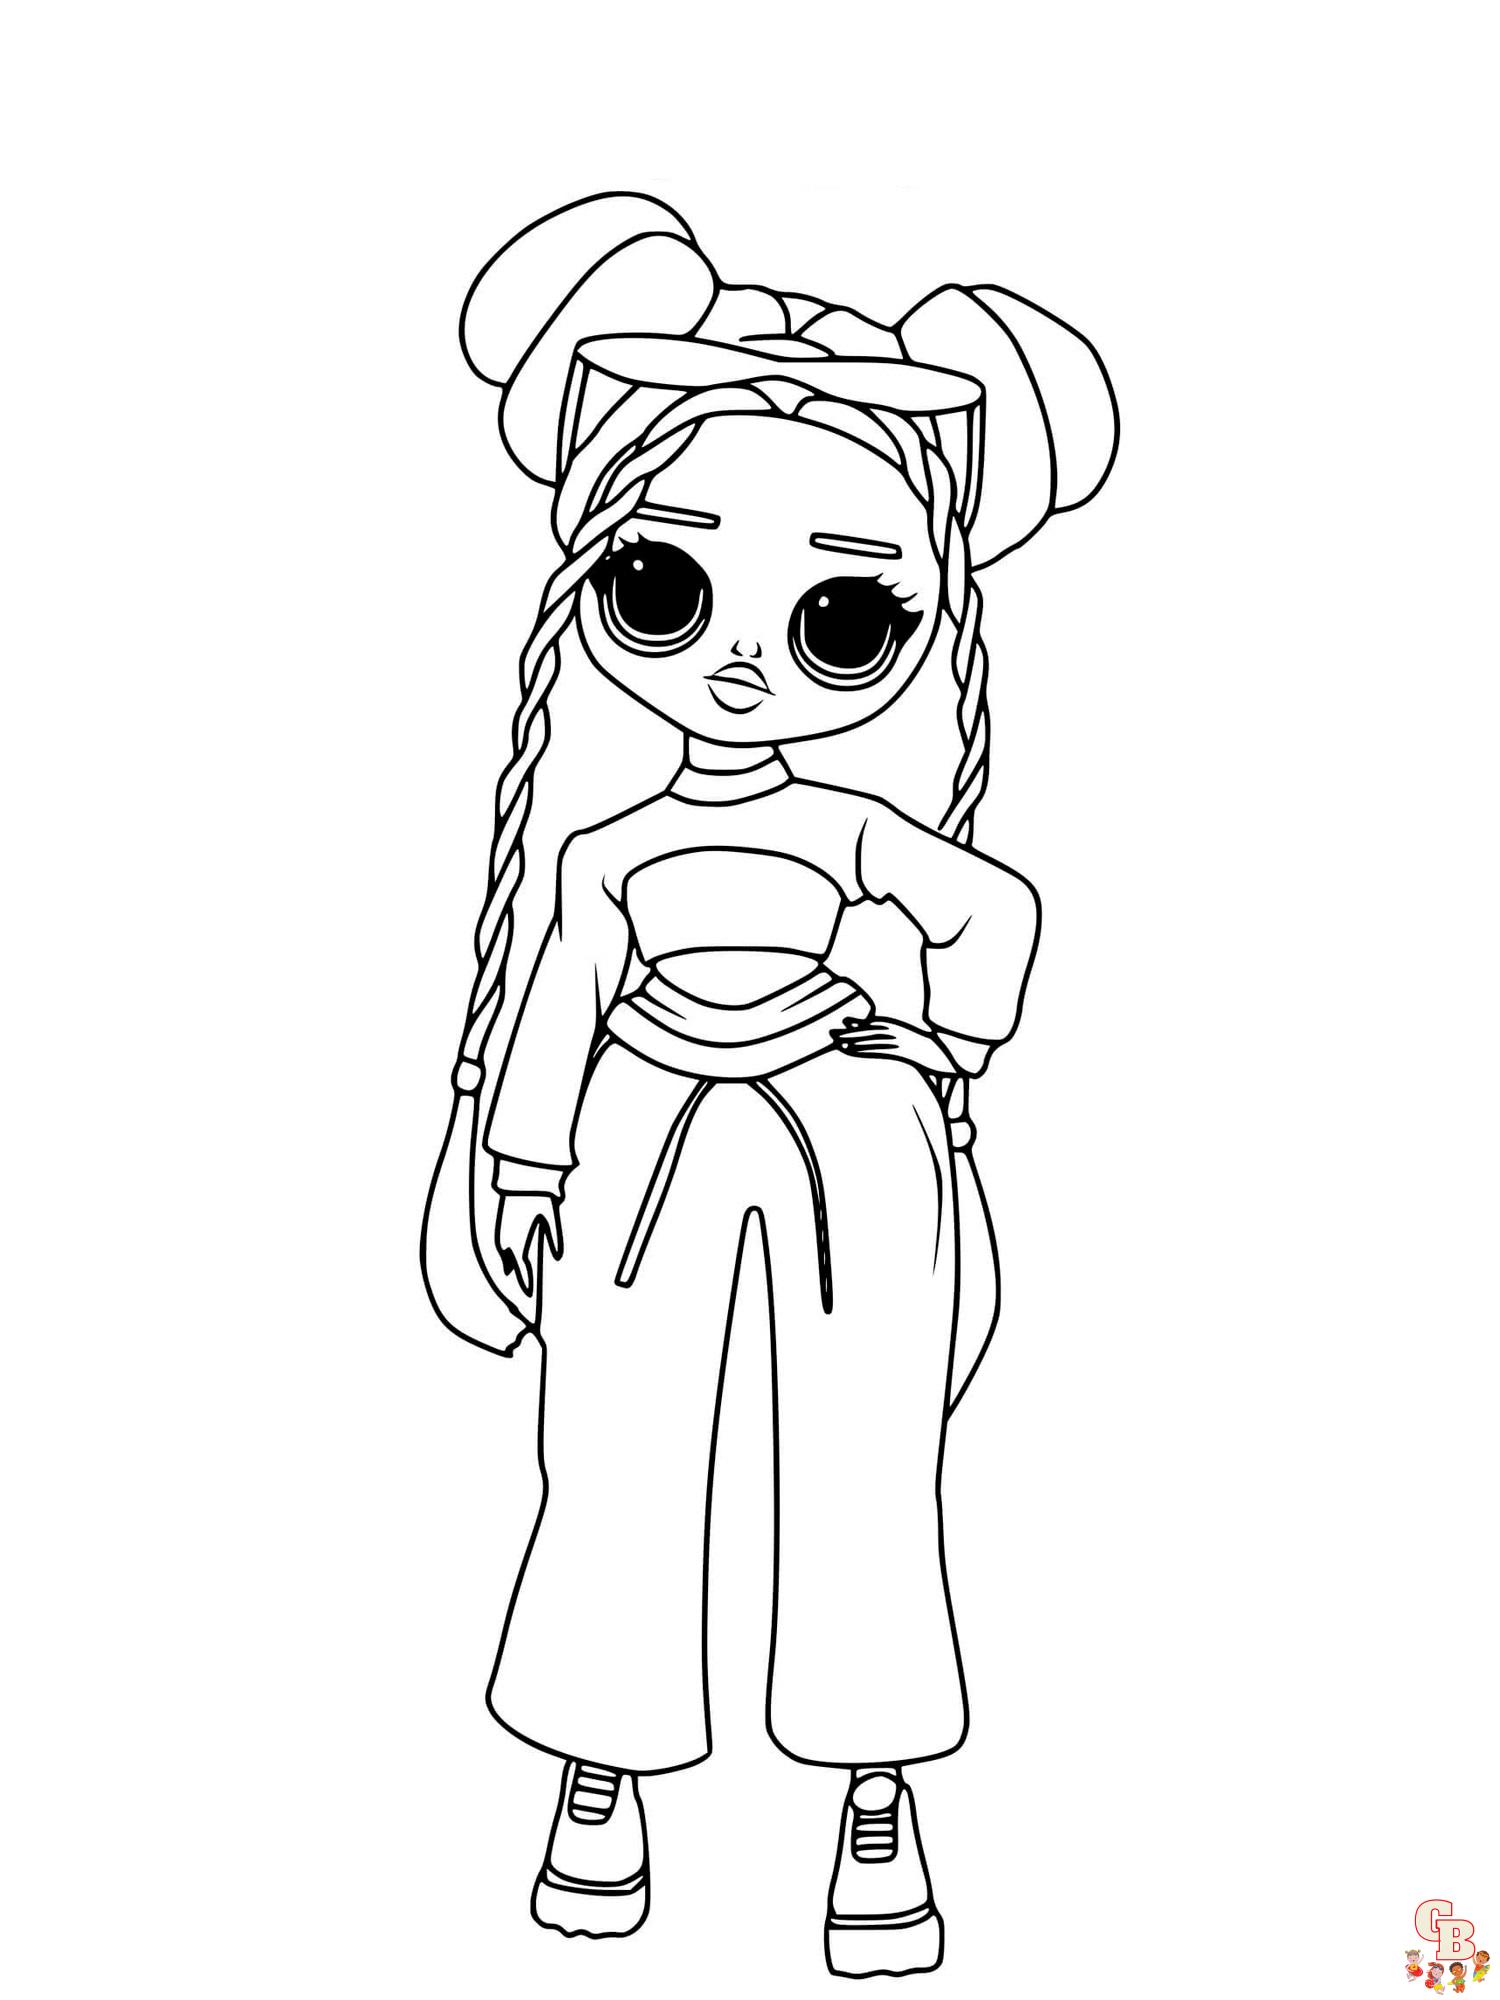 omg fashion lol omg doll coloring pages 8